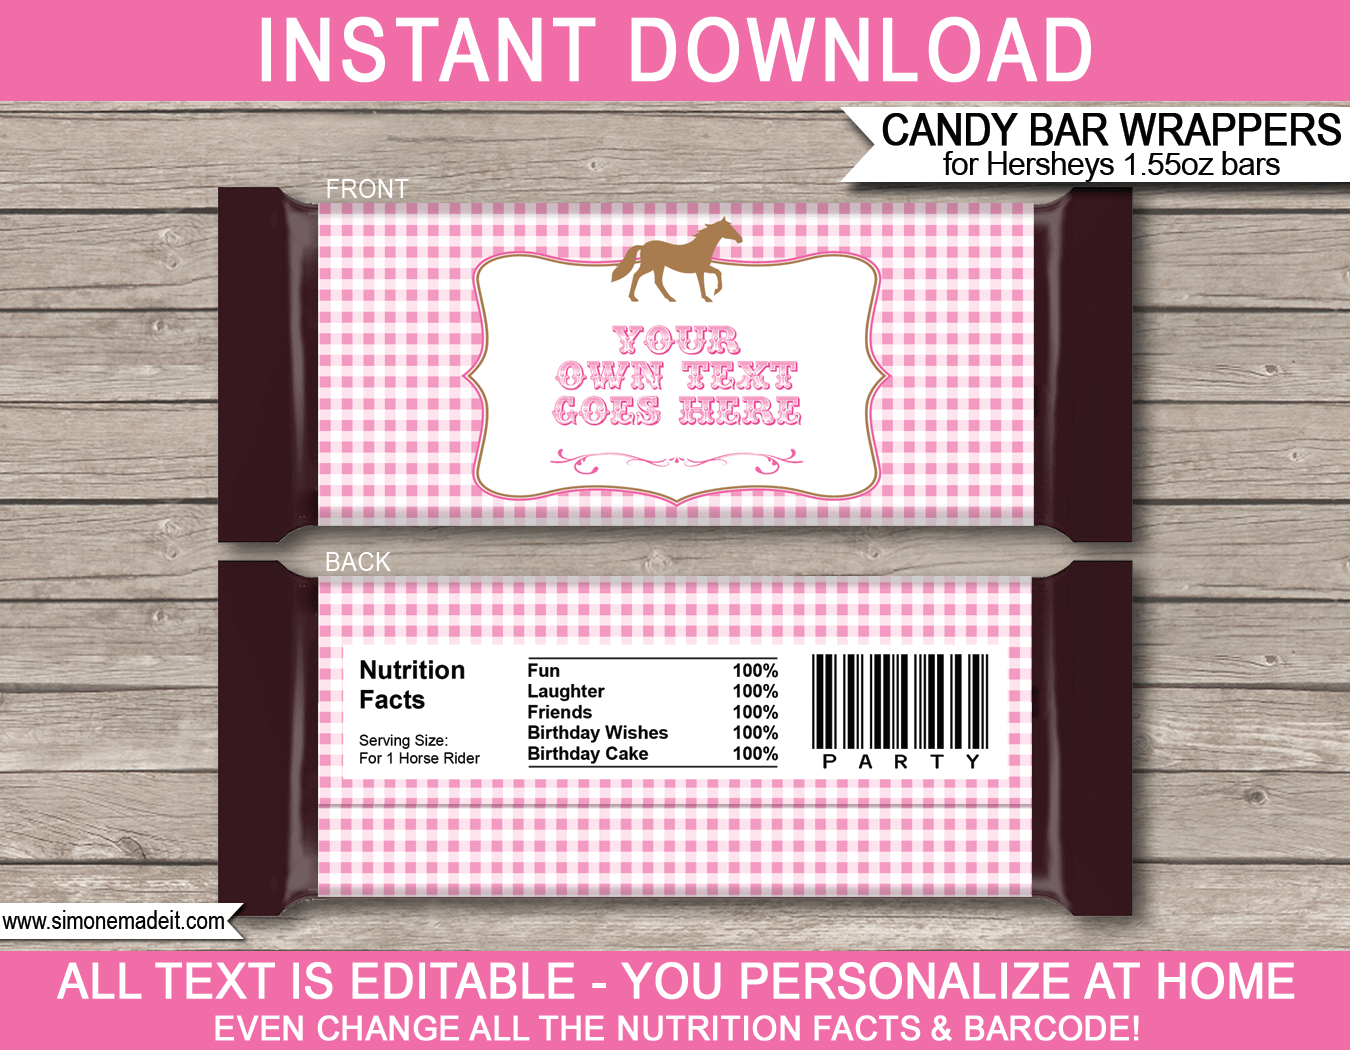 Pony Horse Hershey Candy Bar Wrappers | Birthday Party Favors | Personalized Candy Bars | Editable Template | INSTANT DOWNLOAD $3.00 via simonemadeit.com